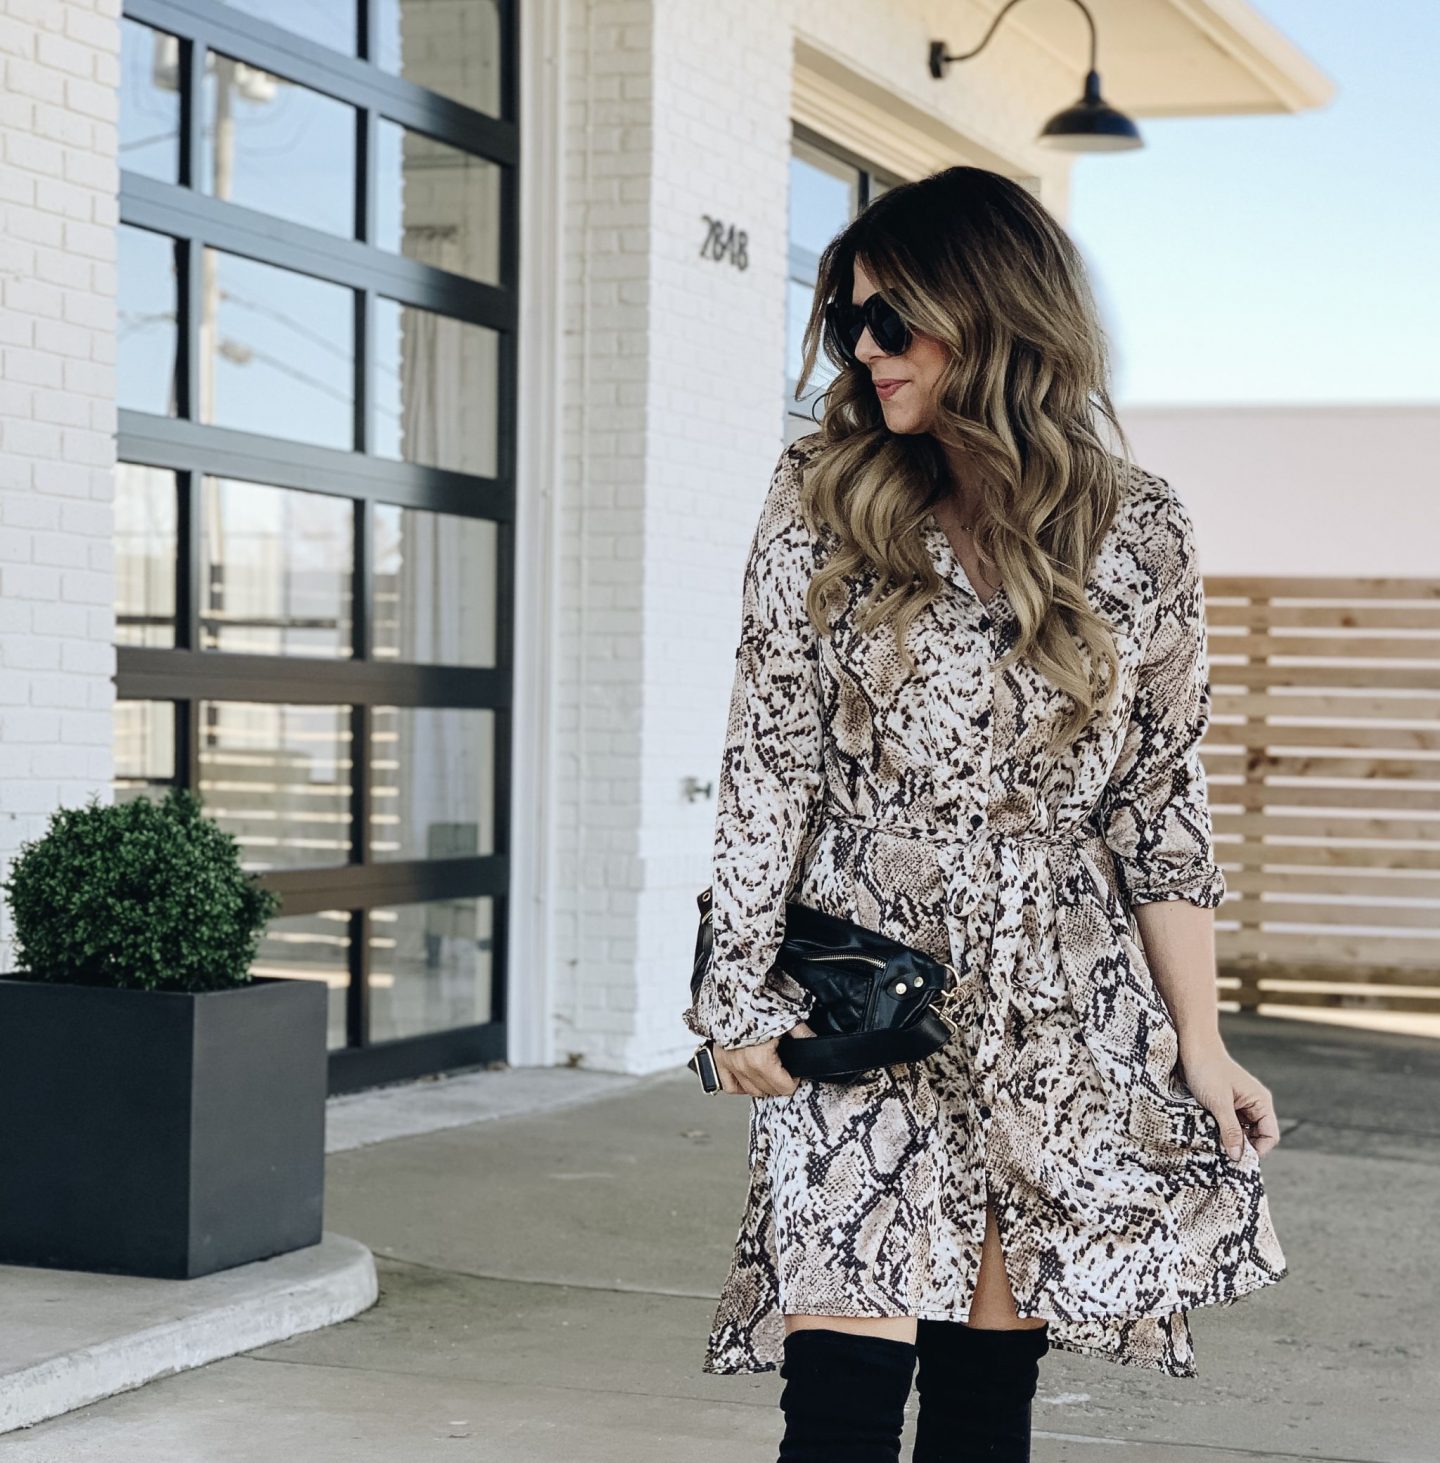 How to style a snakeskin dress, snakeskin, fanny pack, how to wear a belt bag, snake skin, how to style over the knee boots, www.lindseymeek.com